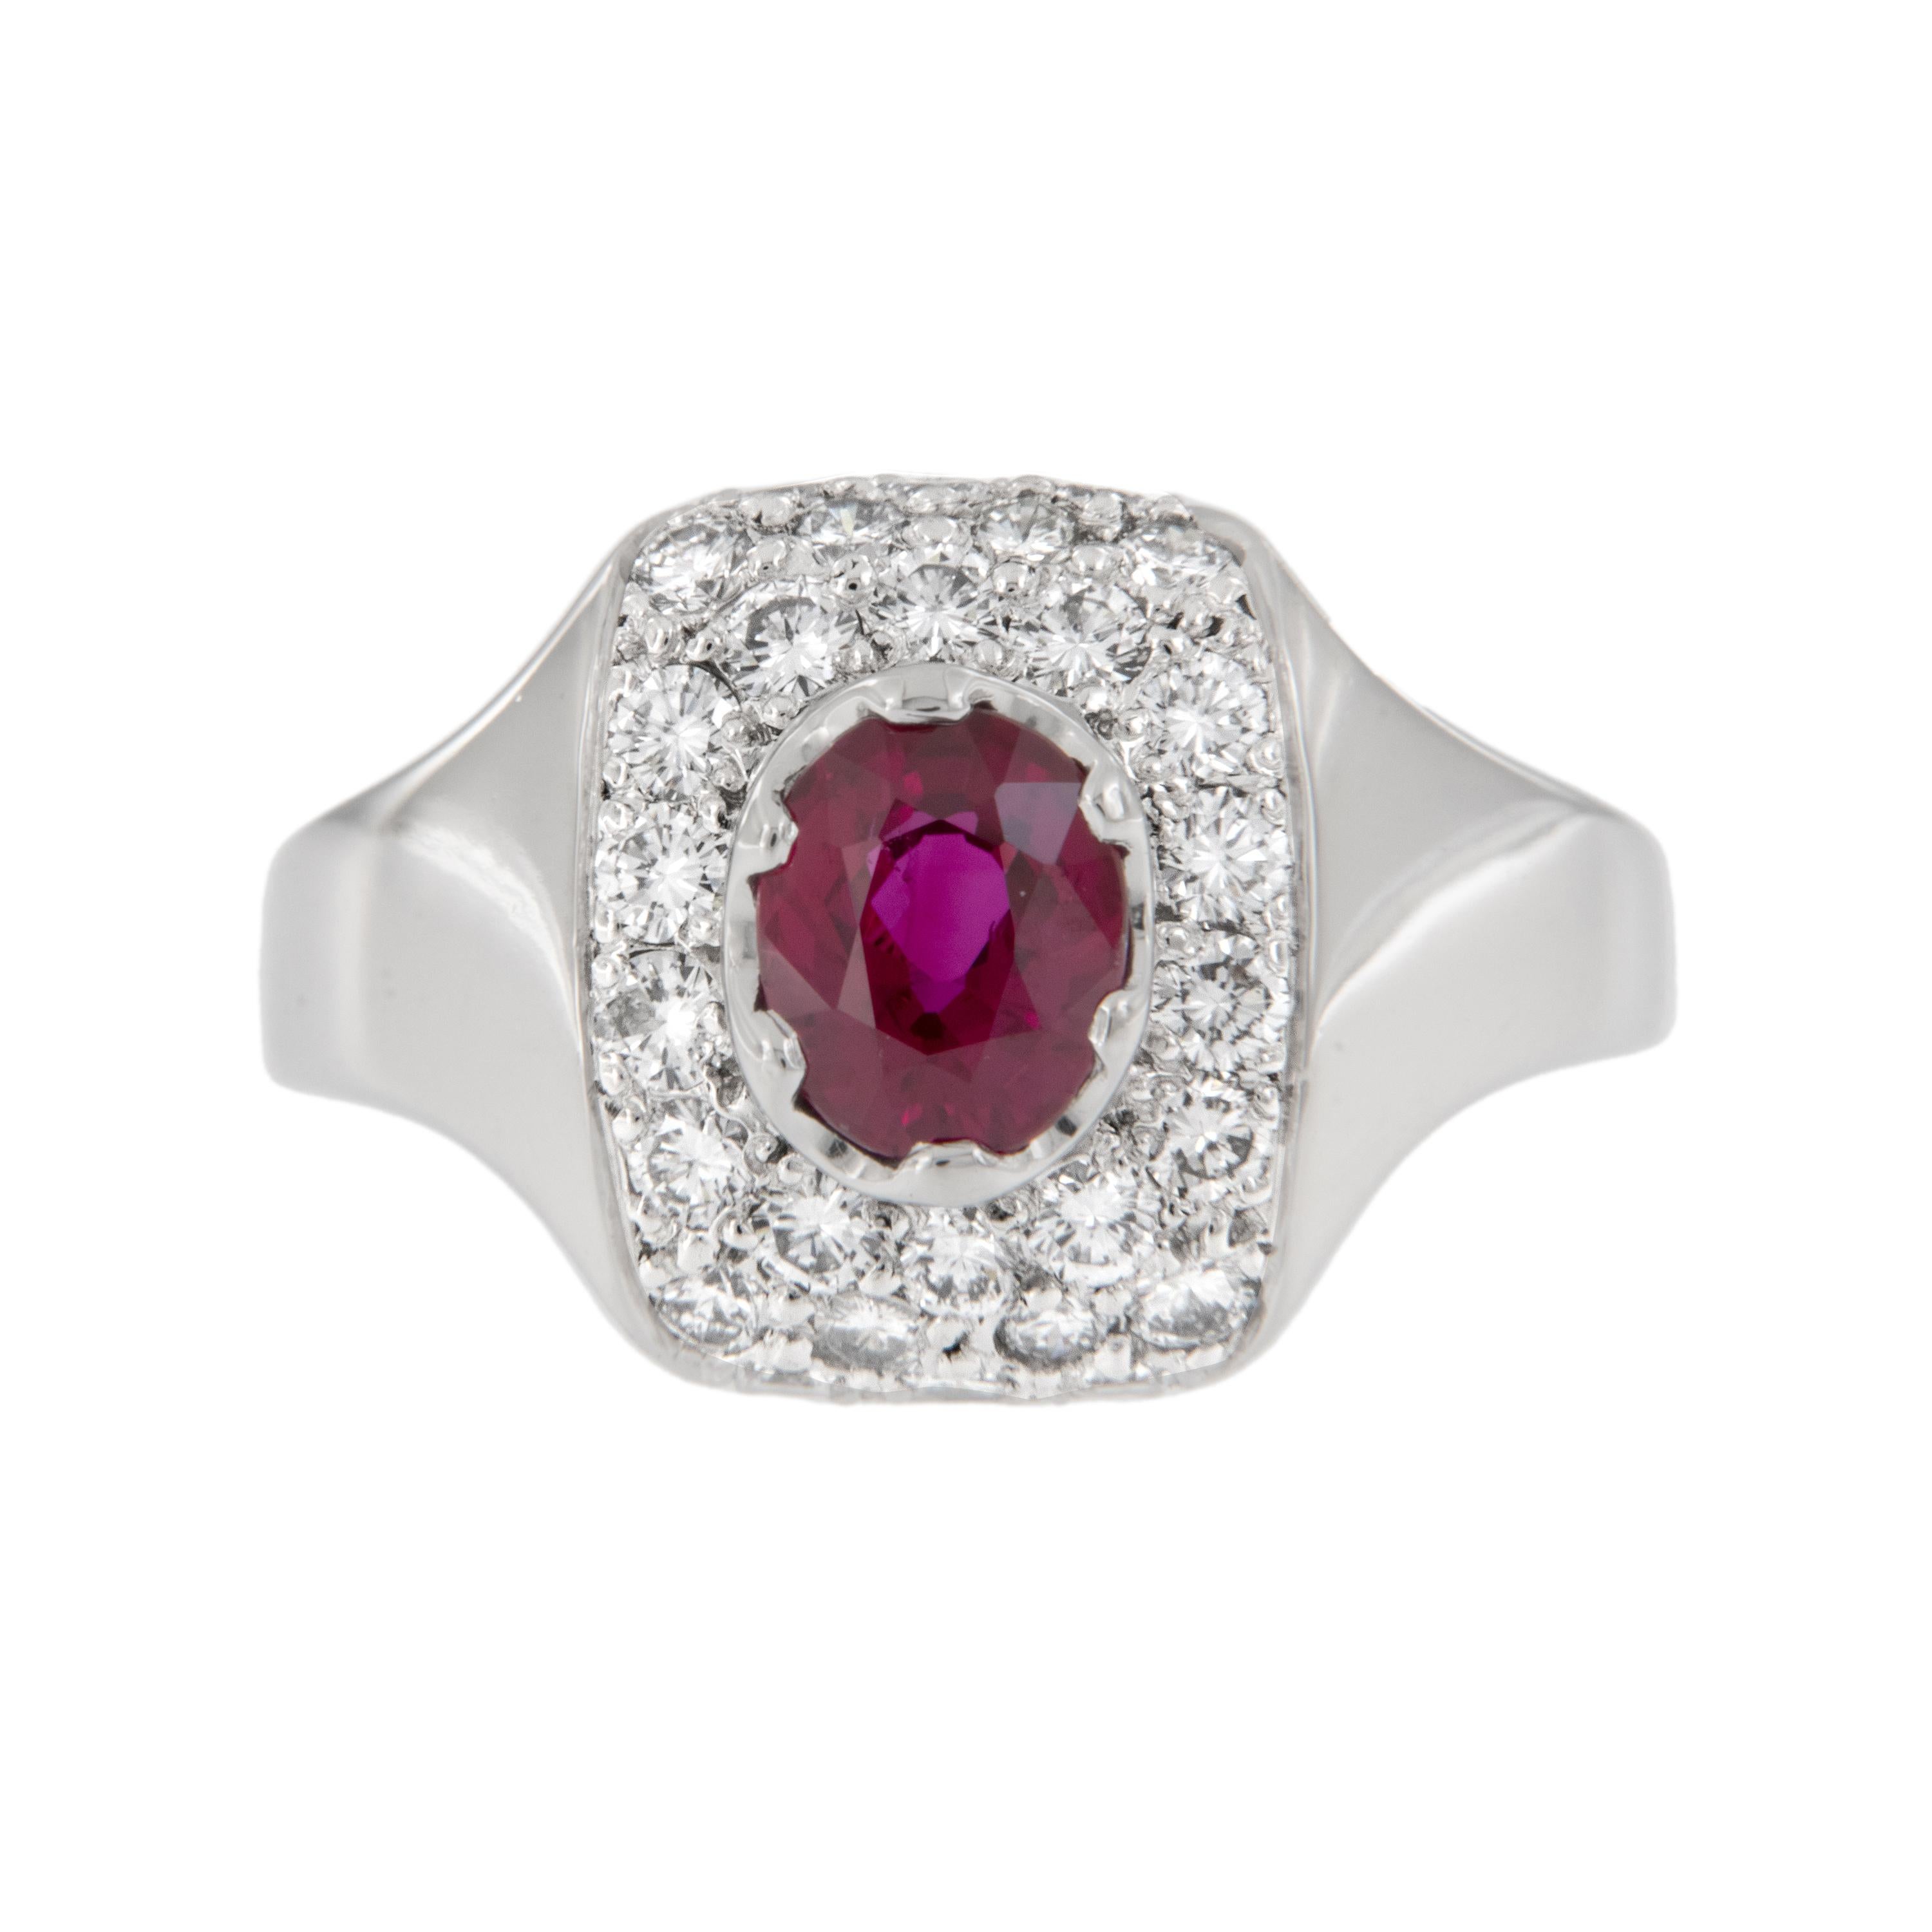 Crafted in noble platinum, this ring showcases a 1.05 carat ruby of exceptional color and clarity, surrounded by three quarters of a carat  ( 0.75 Cttw) of fine quality diamonds pave' set in a pretty cushion shape to set off the ruby perfectly. Ring